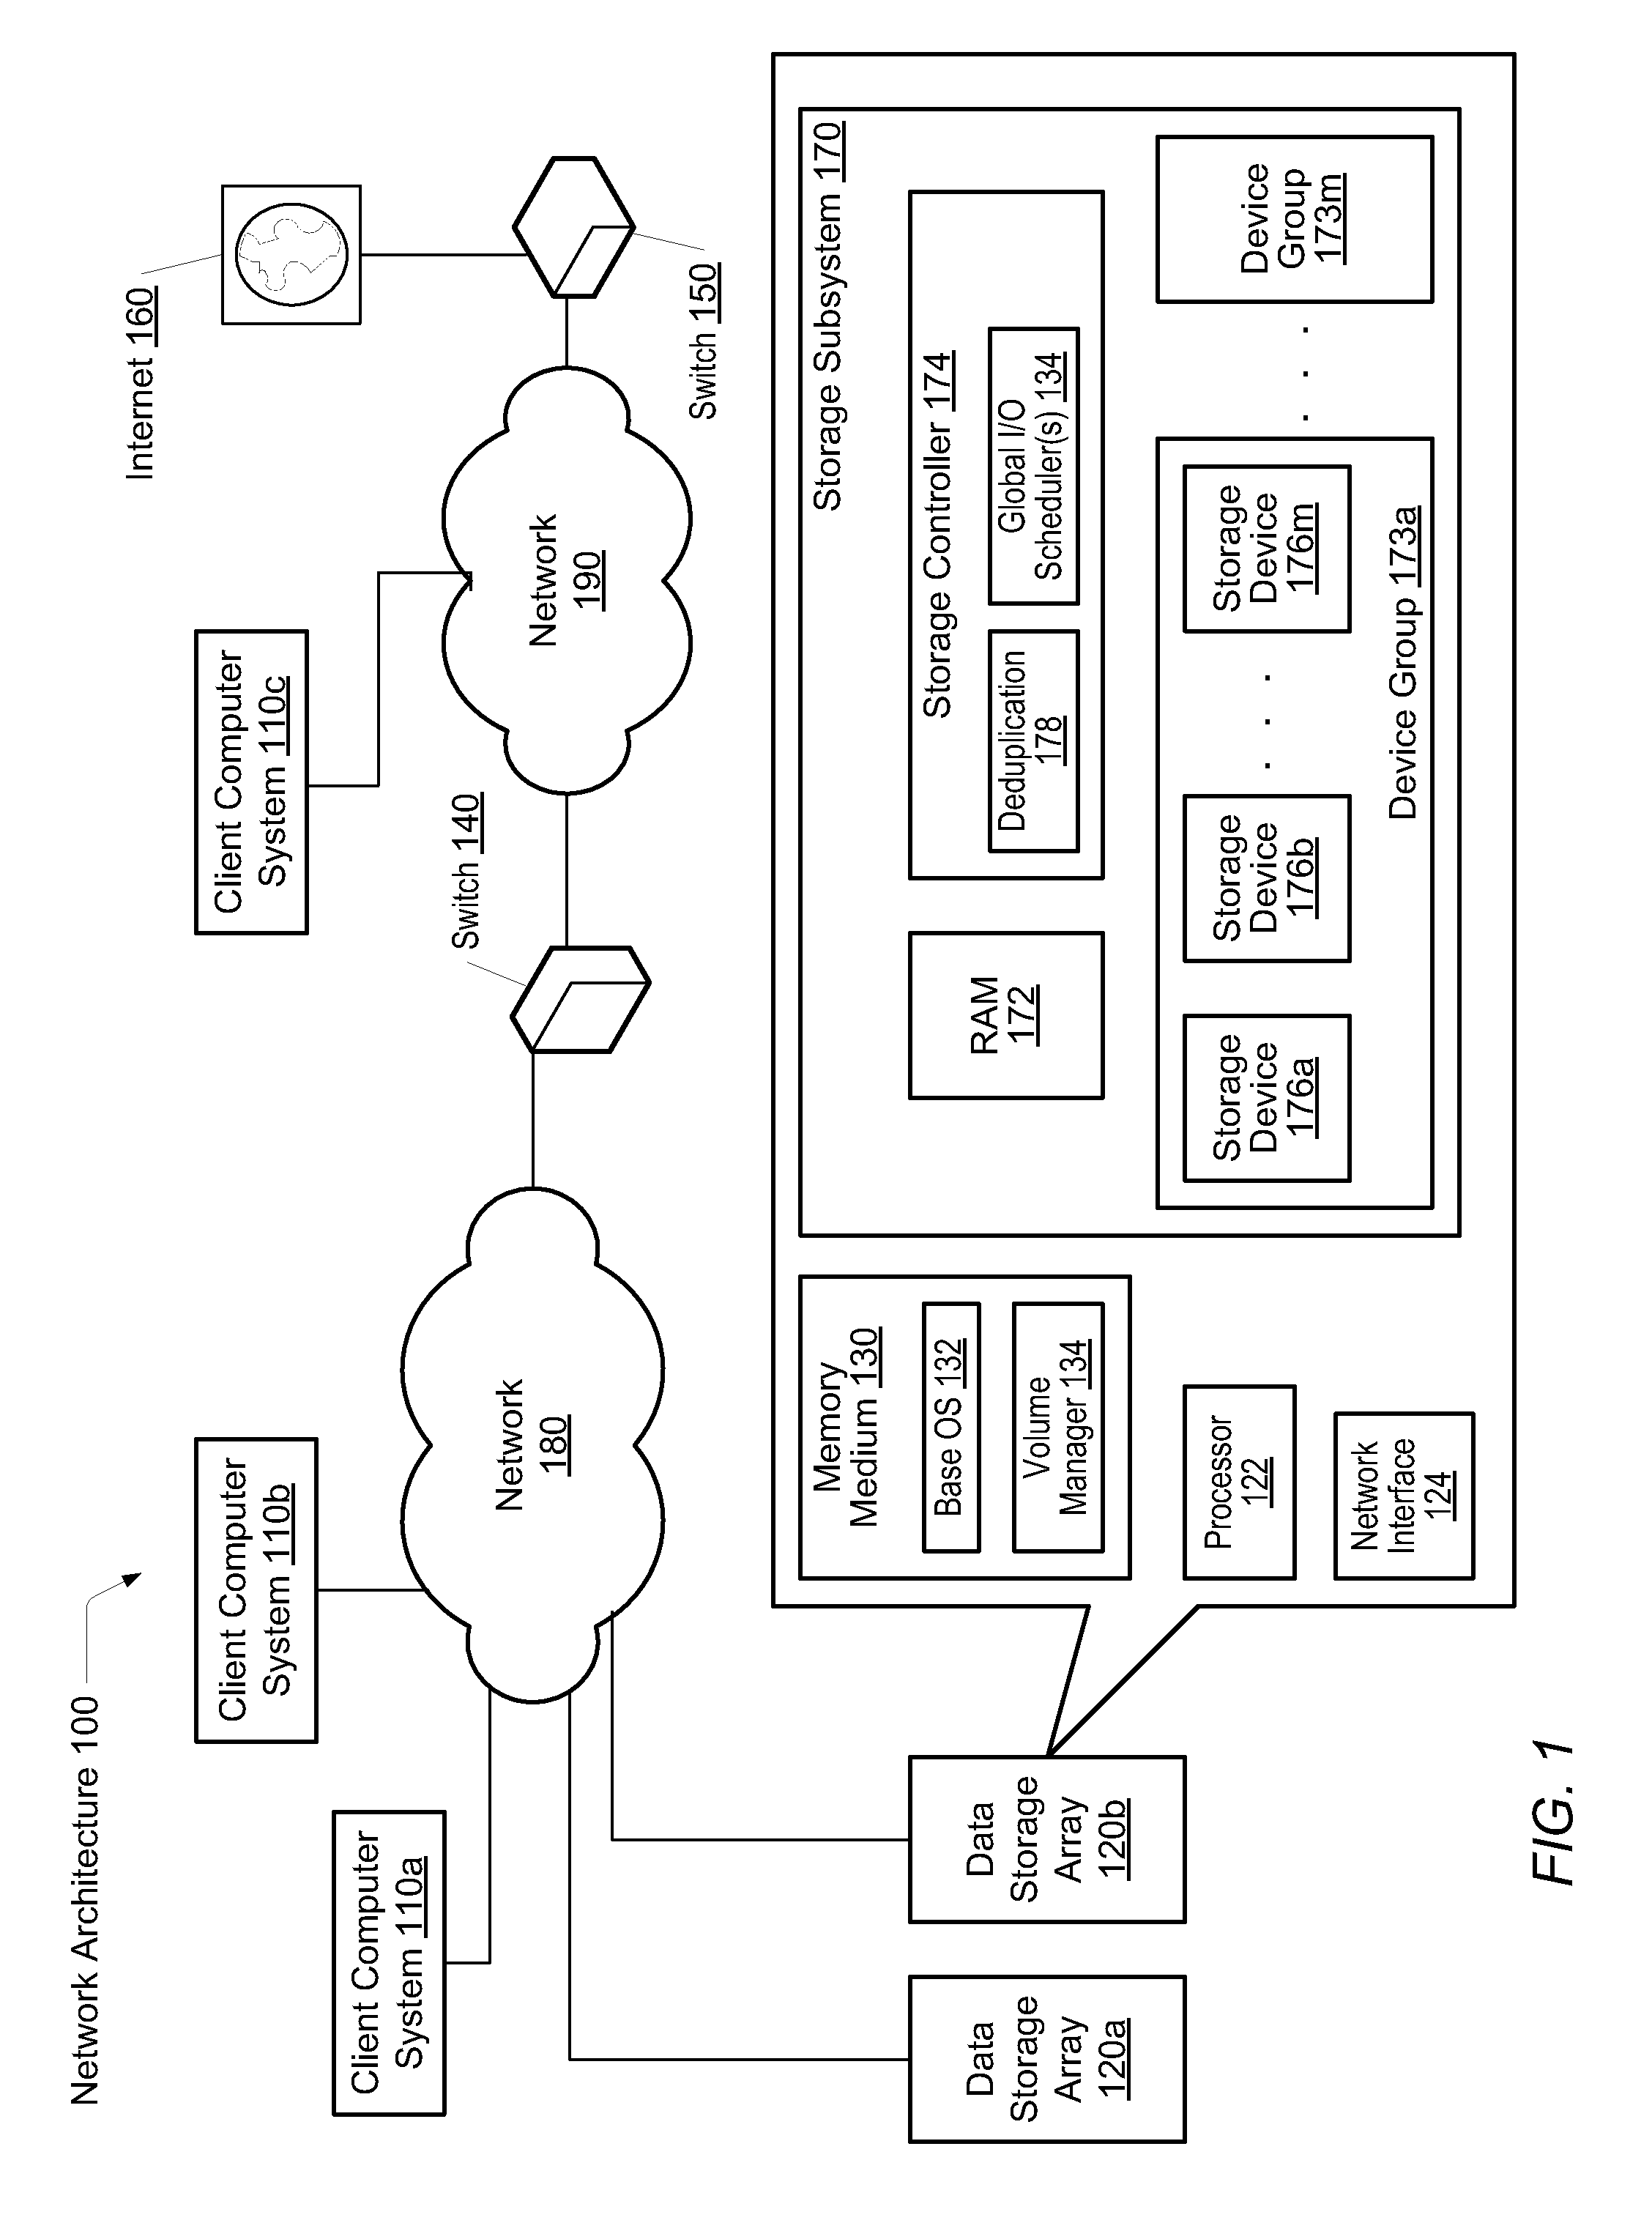 Mapping in a storage system